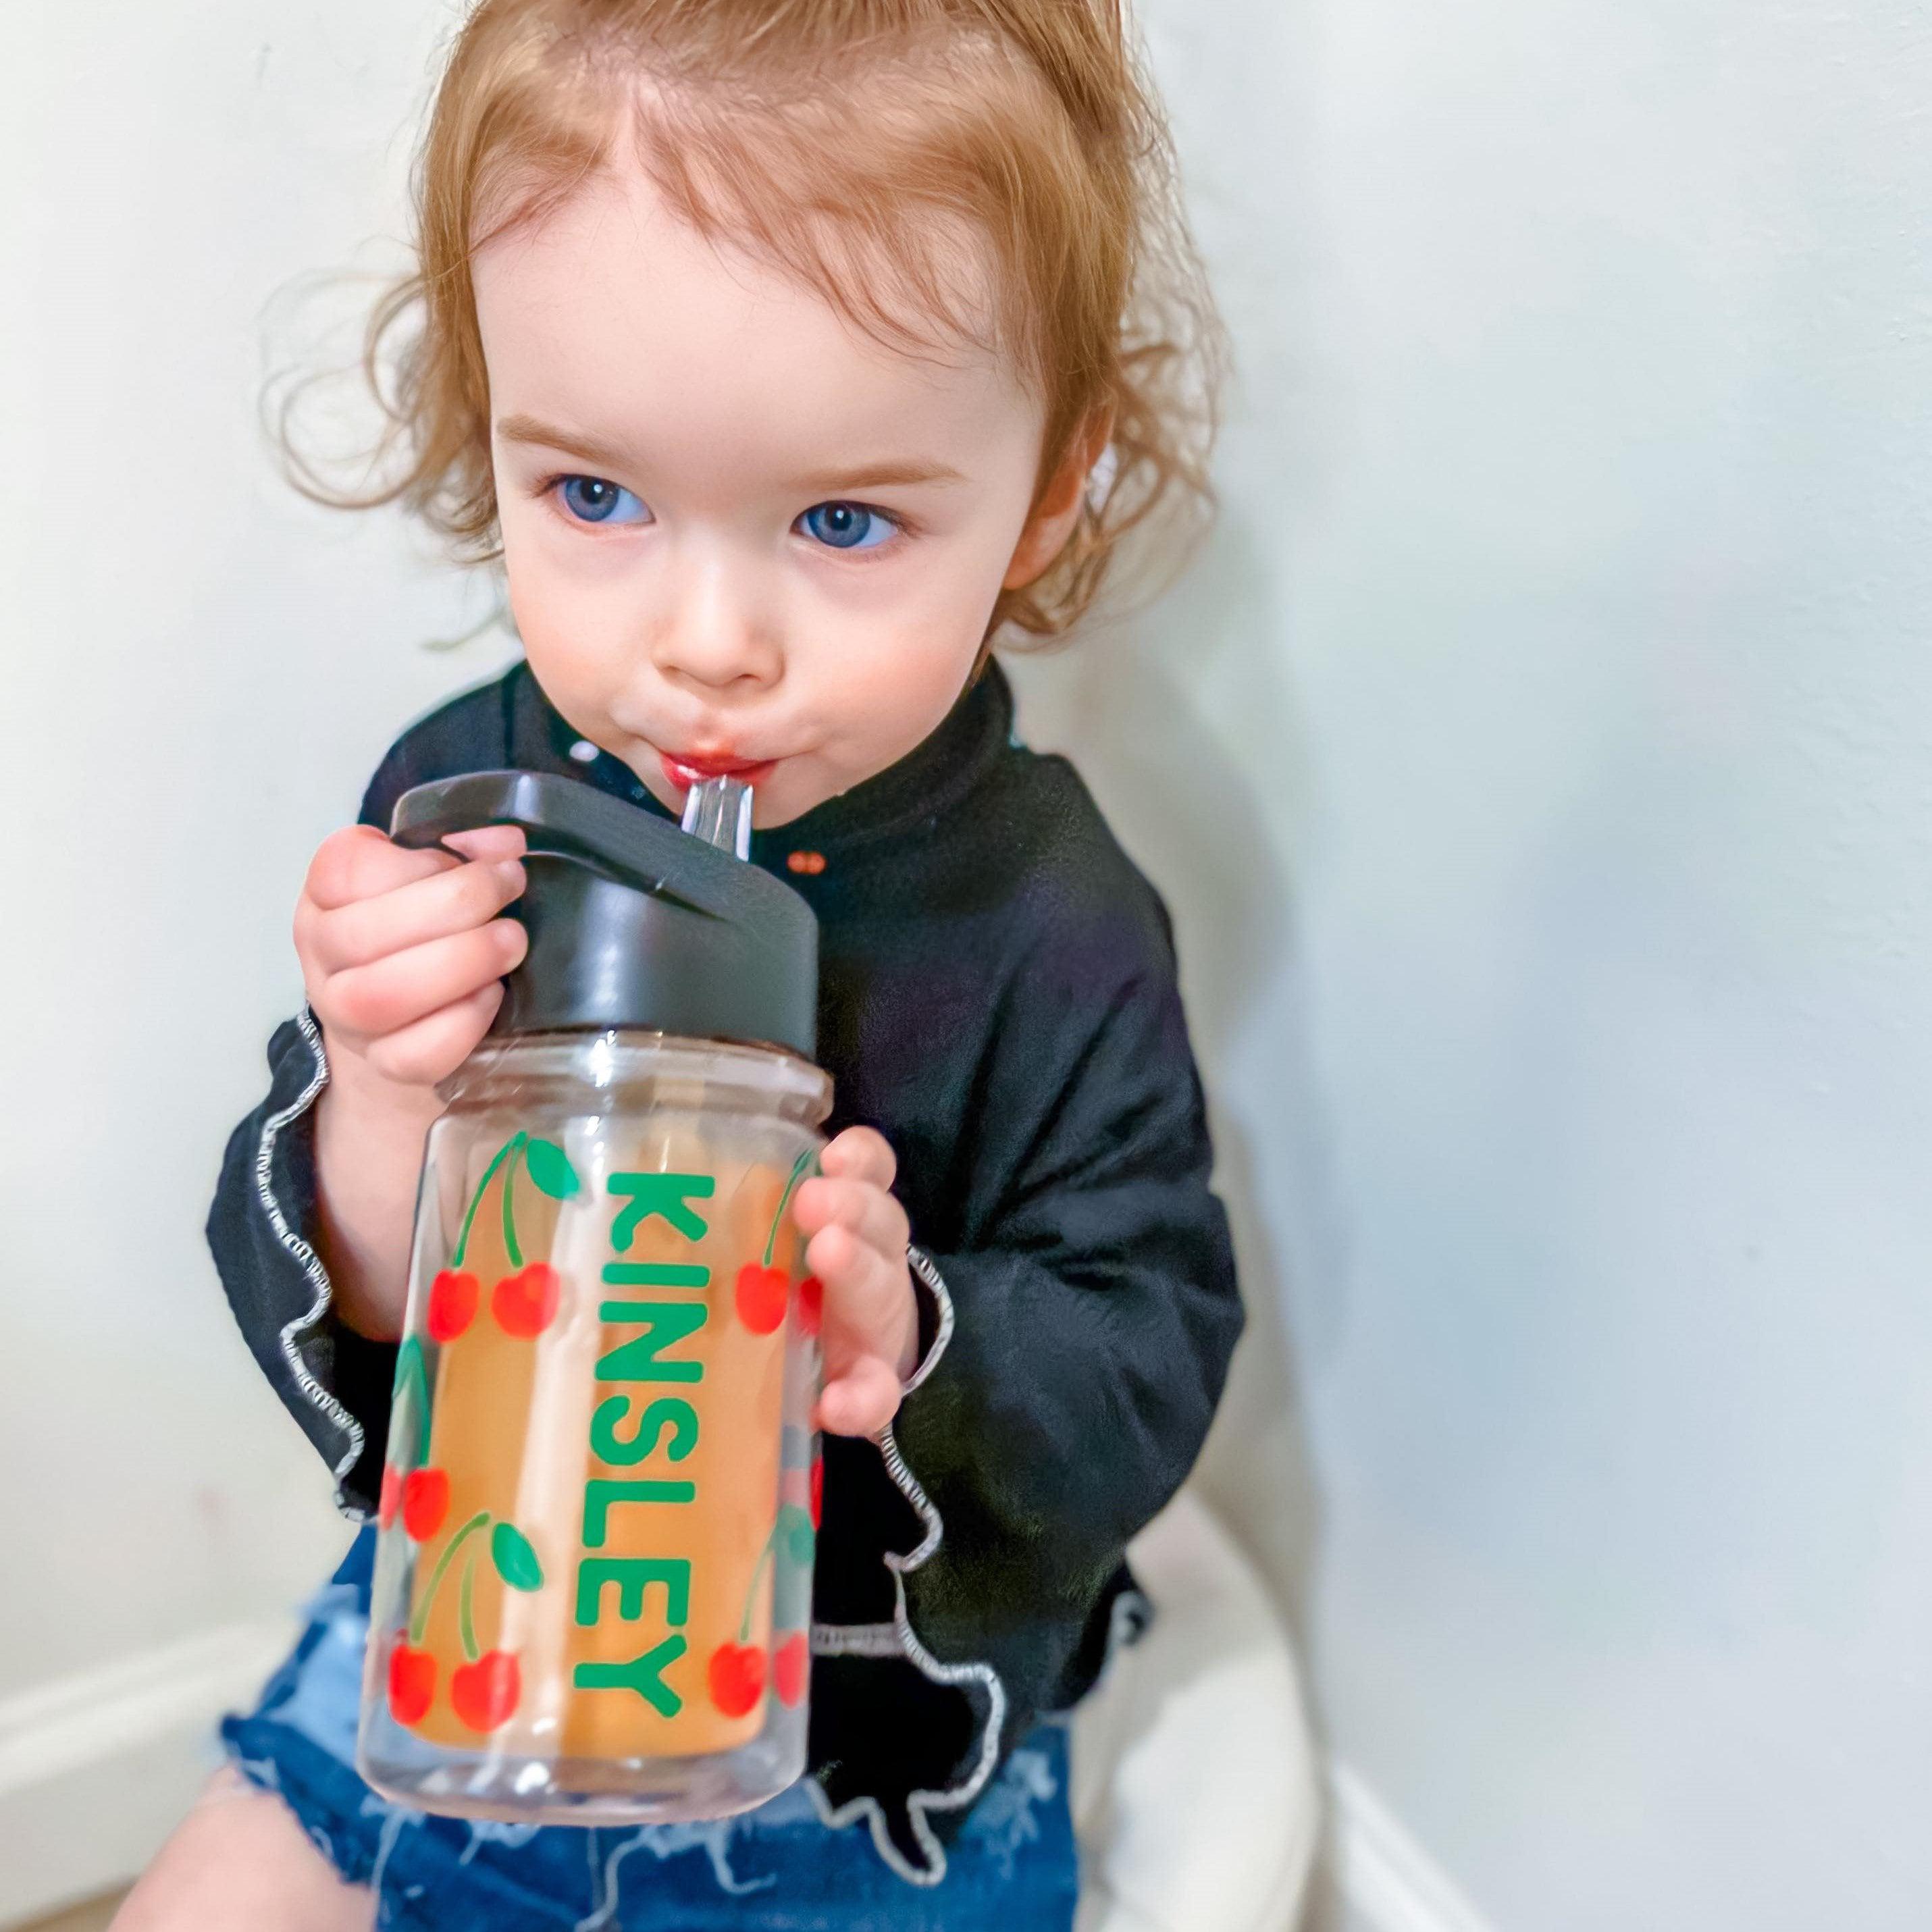 Watermelon Kids Water Bottle - Watermelon Toddler Sippy Cup - Personalized Preschooler Travel Cup for School - Summer Straw Cup for Toddlers